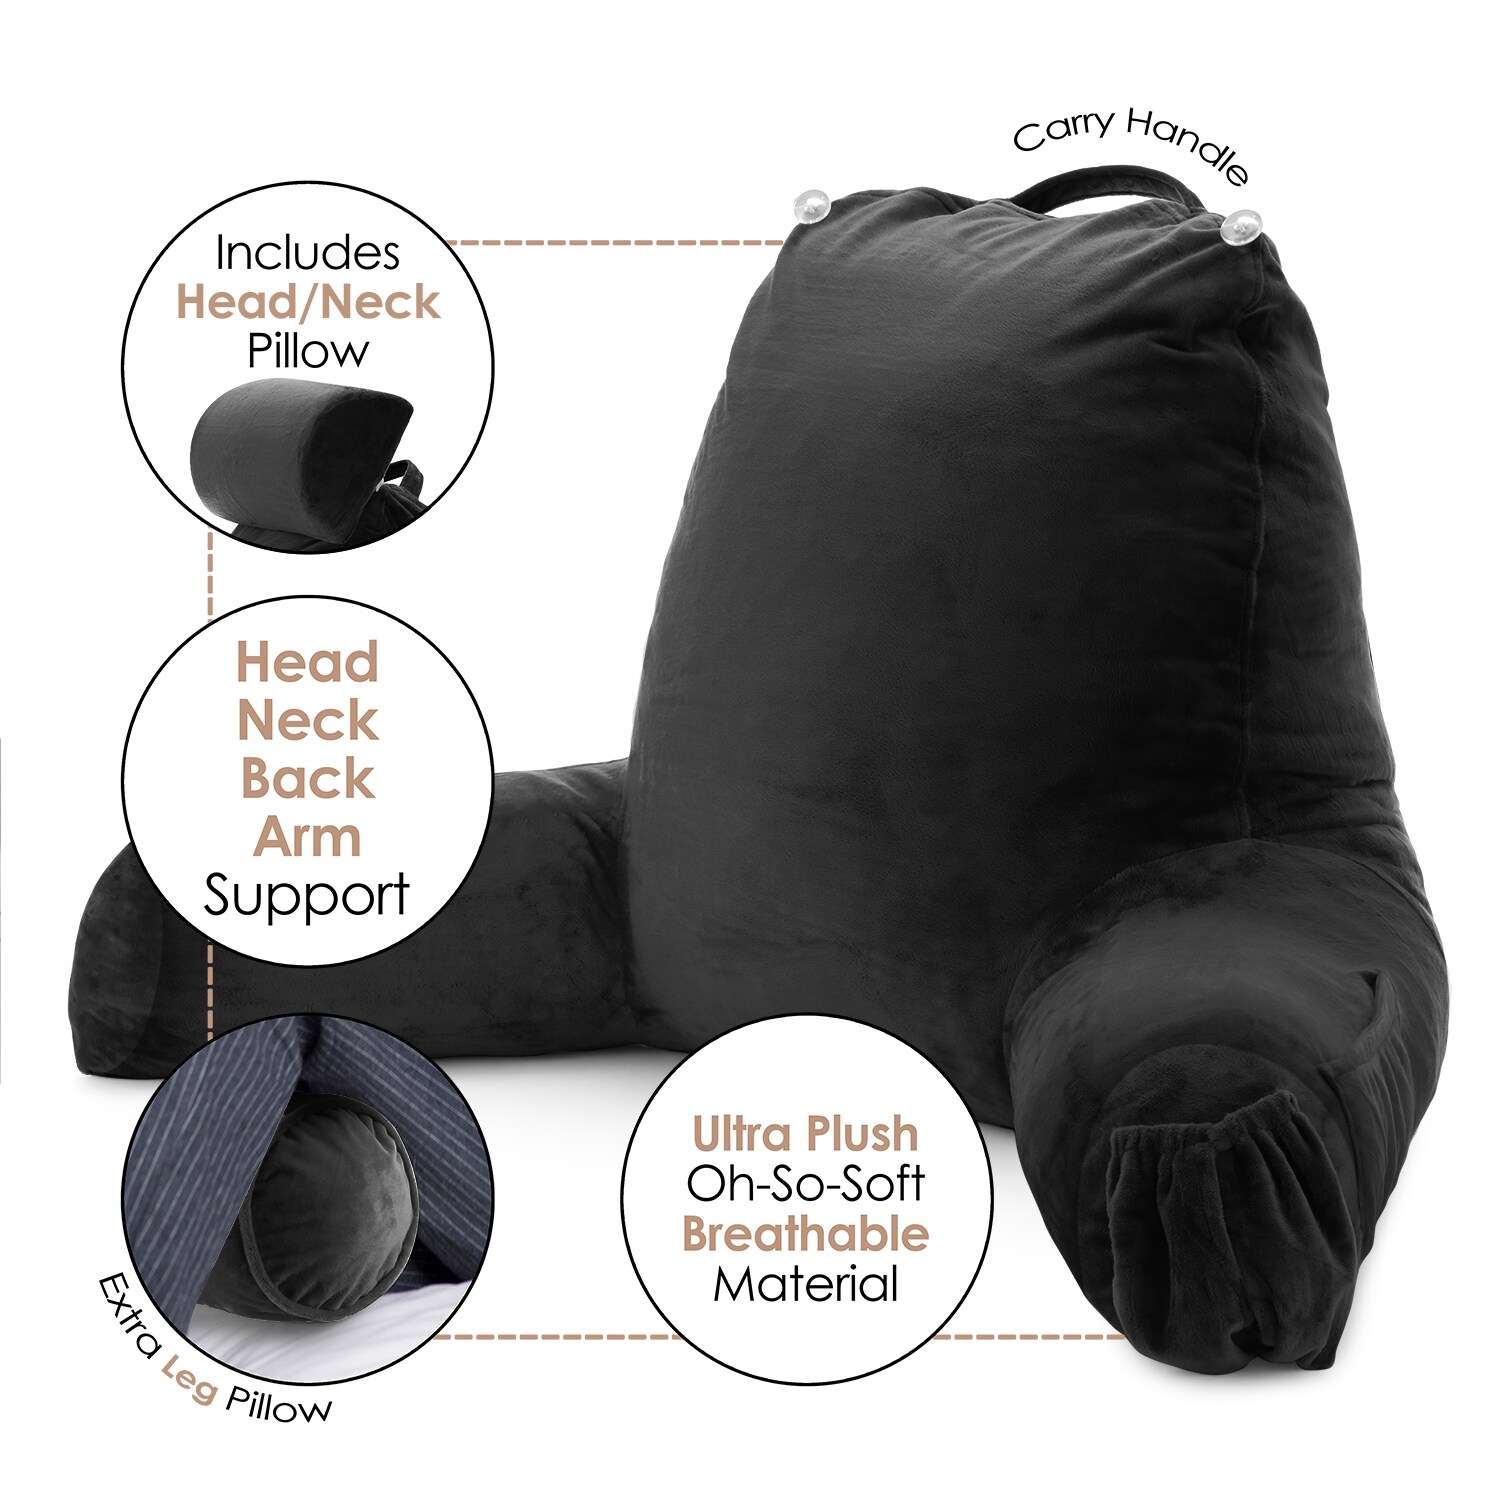 Nestl Backrest Reading Pillow, Back Support Pillow with Arms, Shredded Memory Foam Bed Rest Pillow, Silver Gray